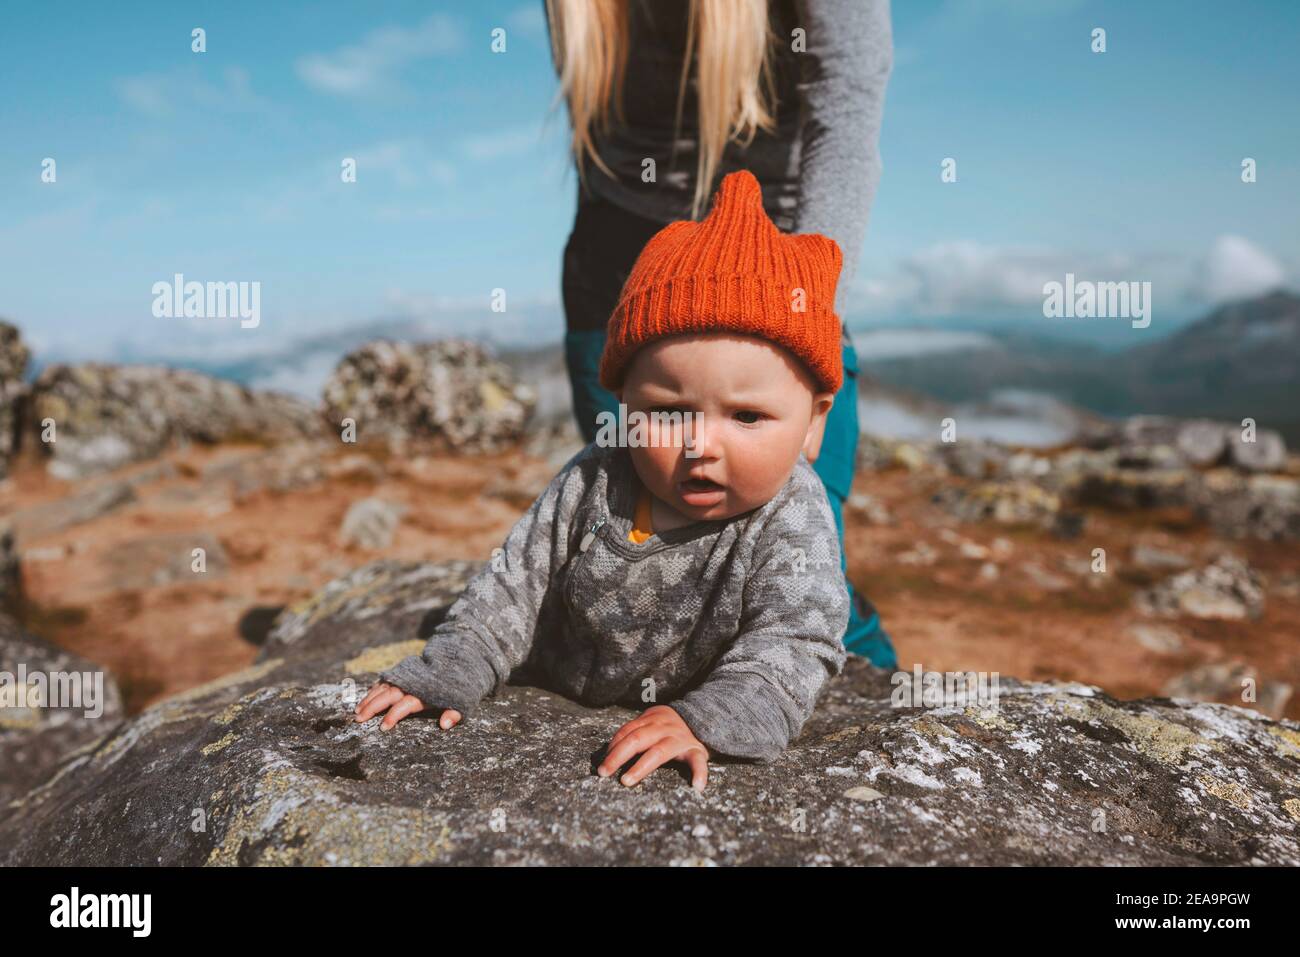 Baby traveler crawling outdoor family lifestyle vacation activity infant child wearing orange hat autumn season trip in Norway Stock Photo